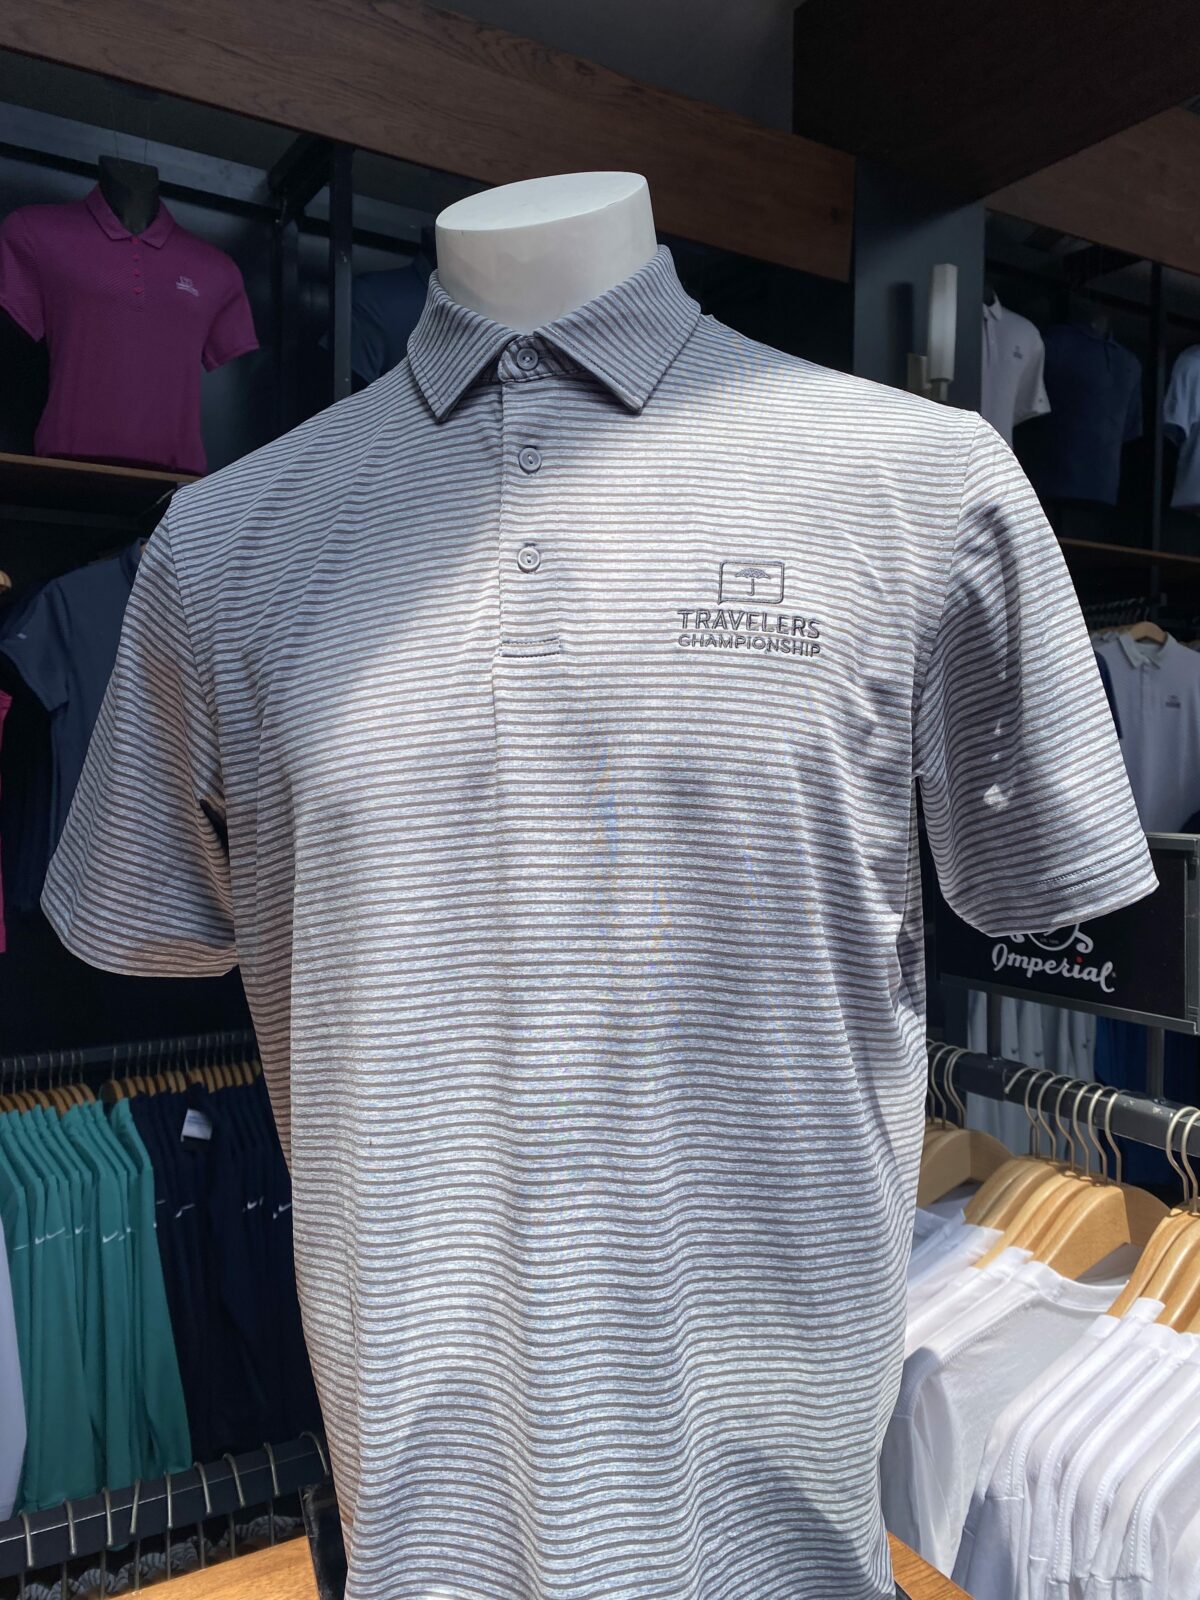 Photos: Some of the best merchandise at the 2022 Travelers Championship